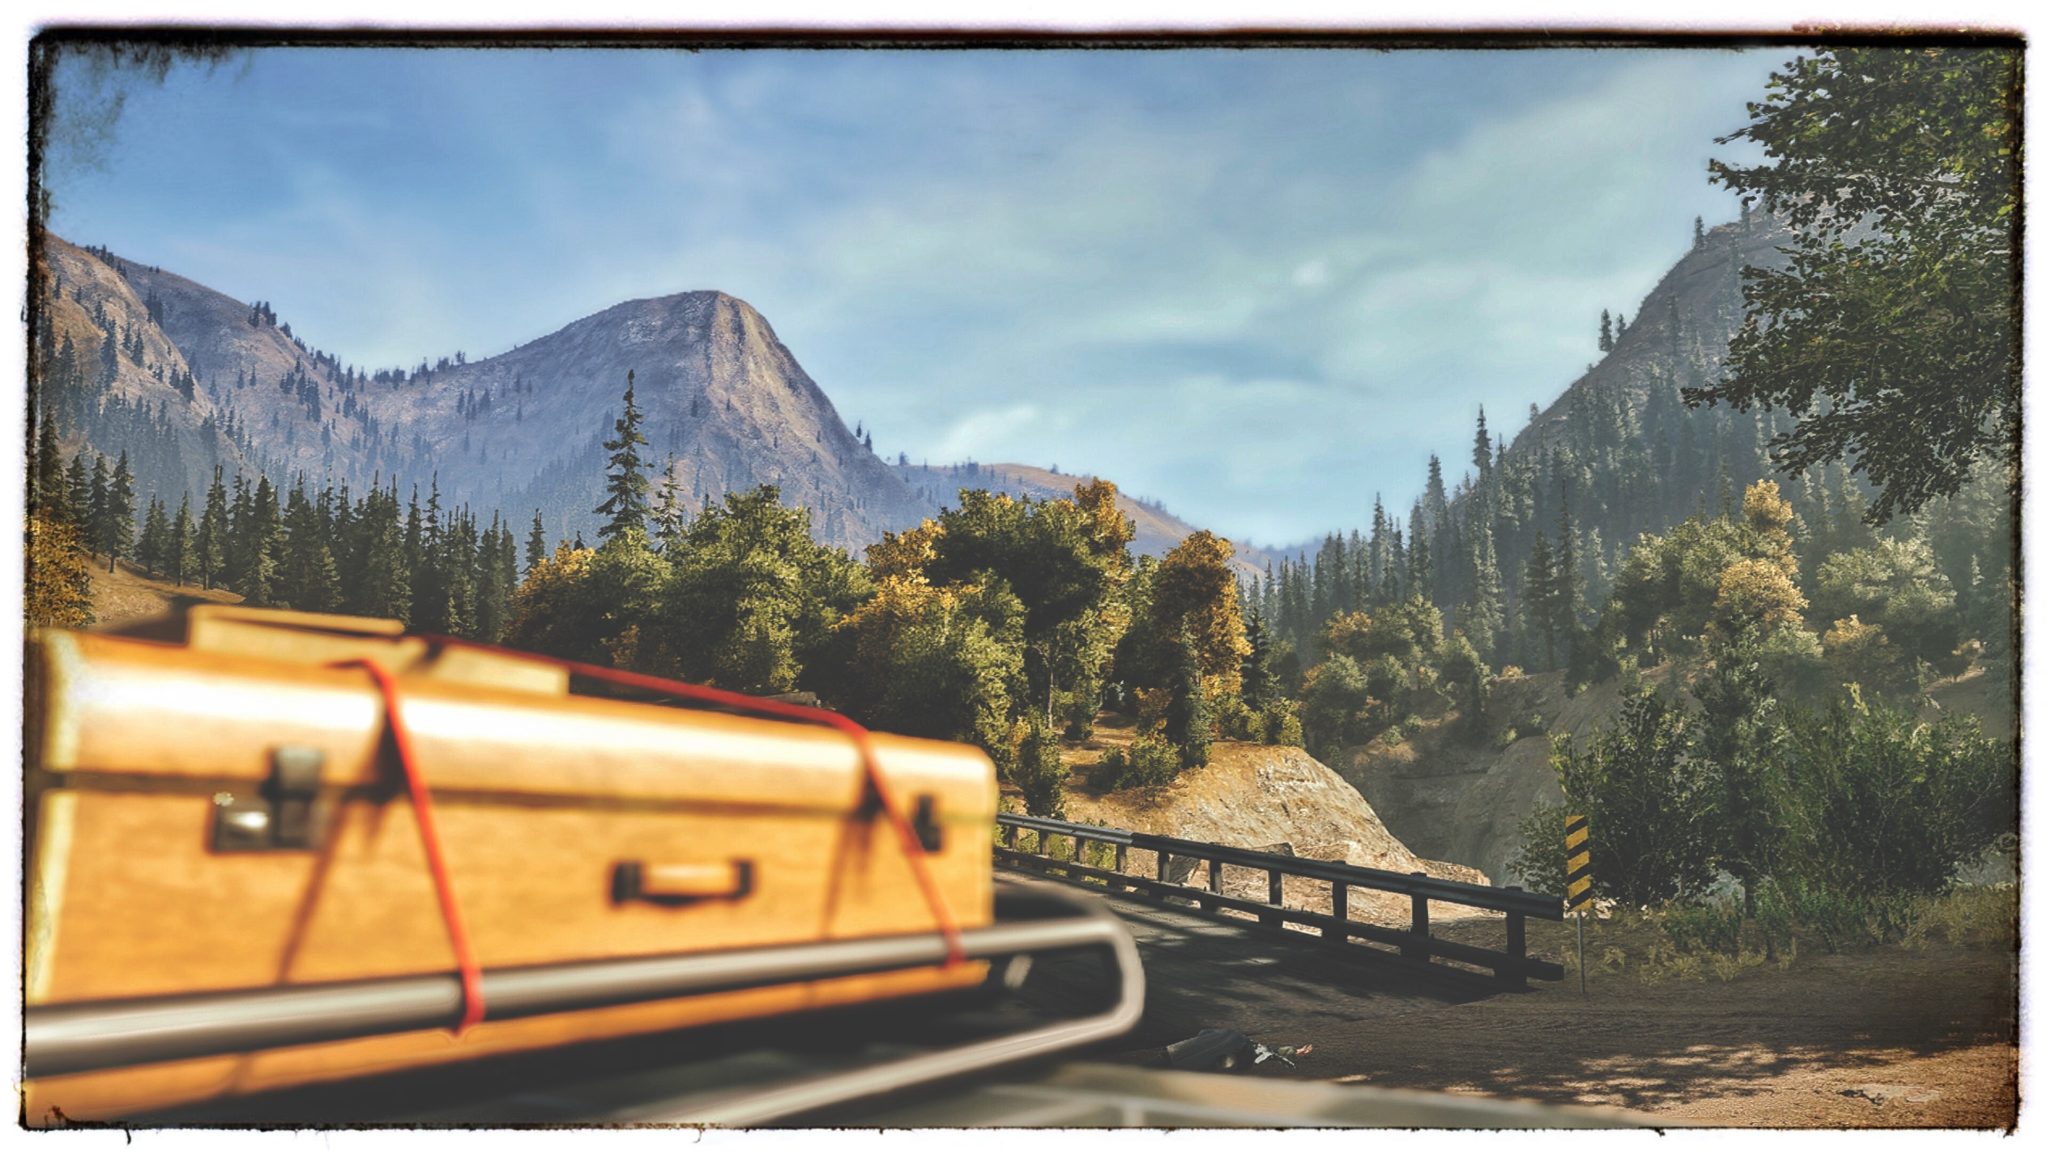 Farcry 5 in game photography